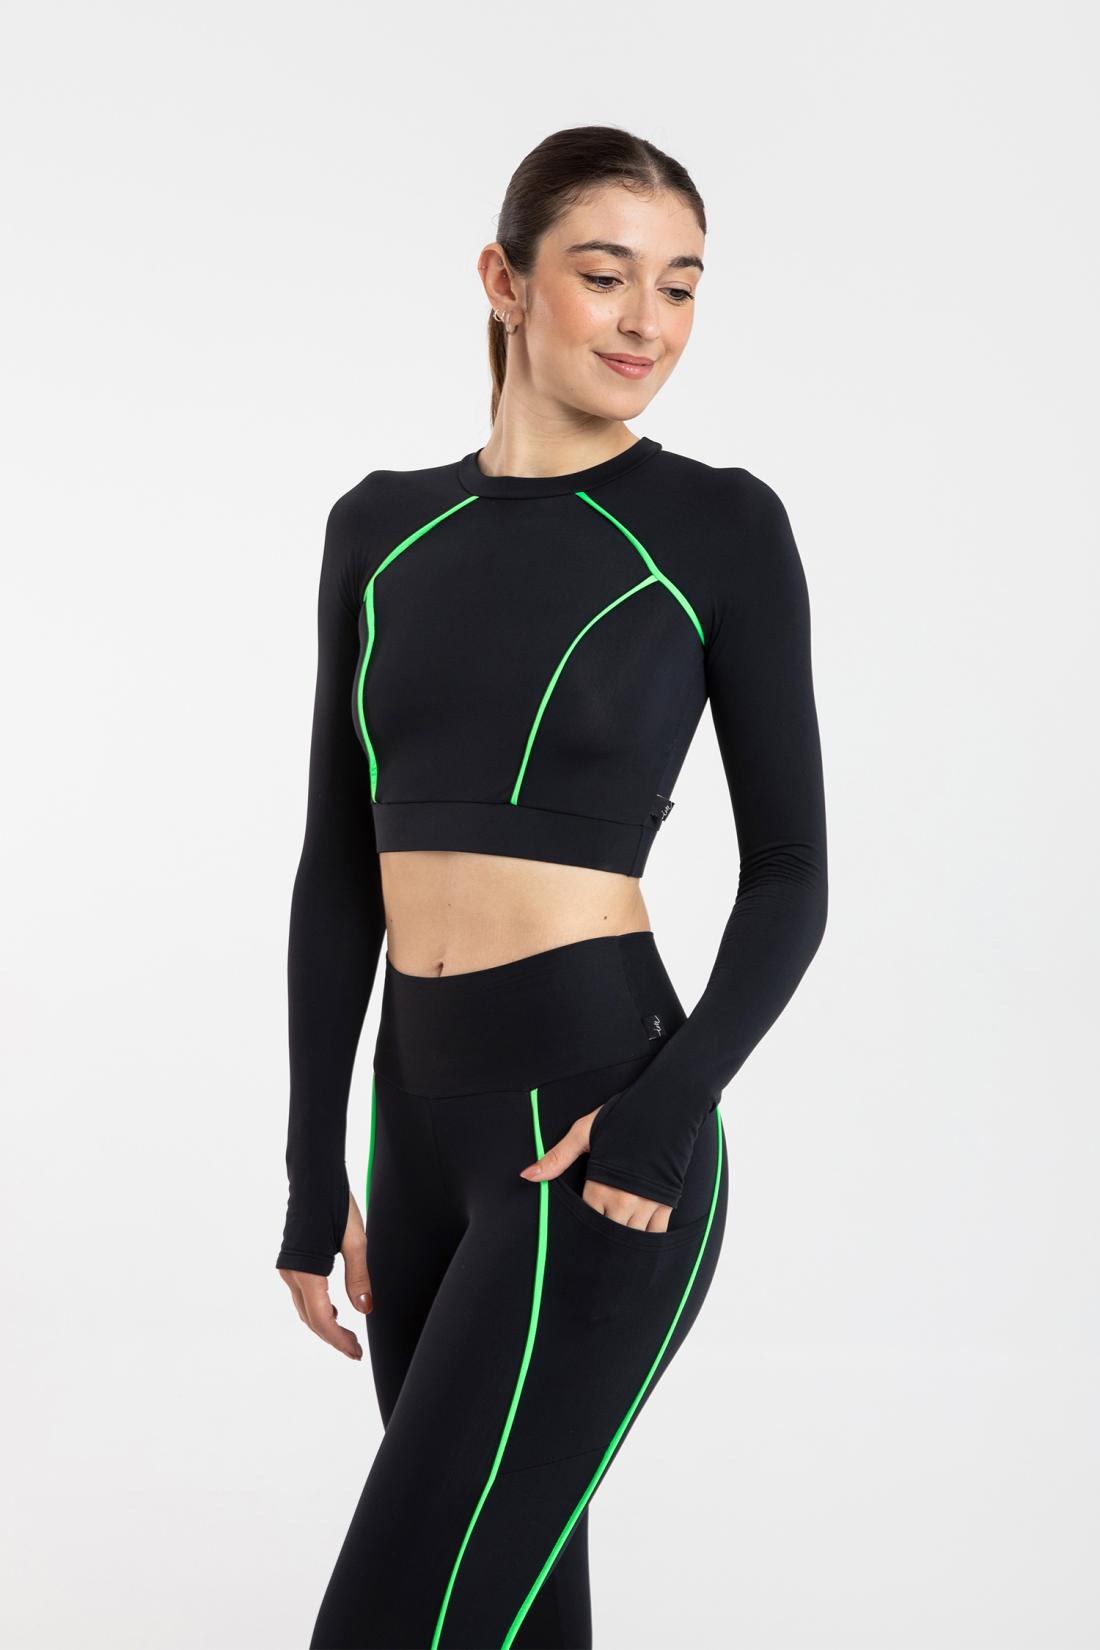 Chenoa Long sleeve top with colored piping Brushed fabric inside for Figure Skating Intermezzo